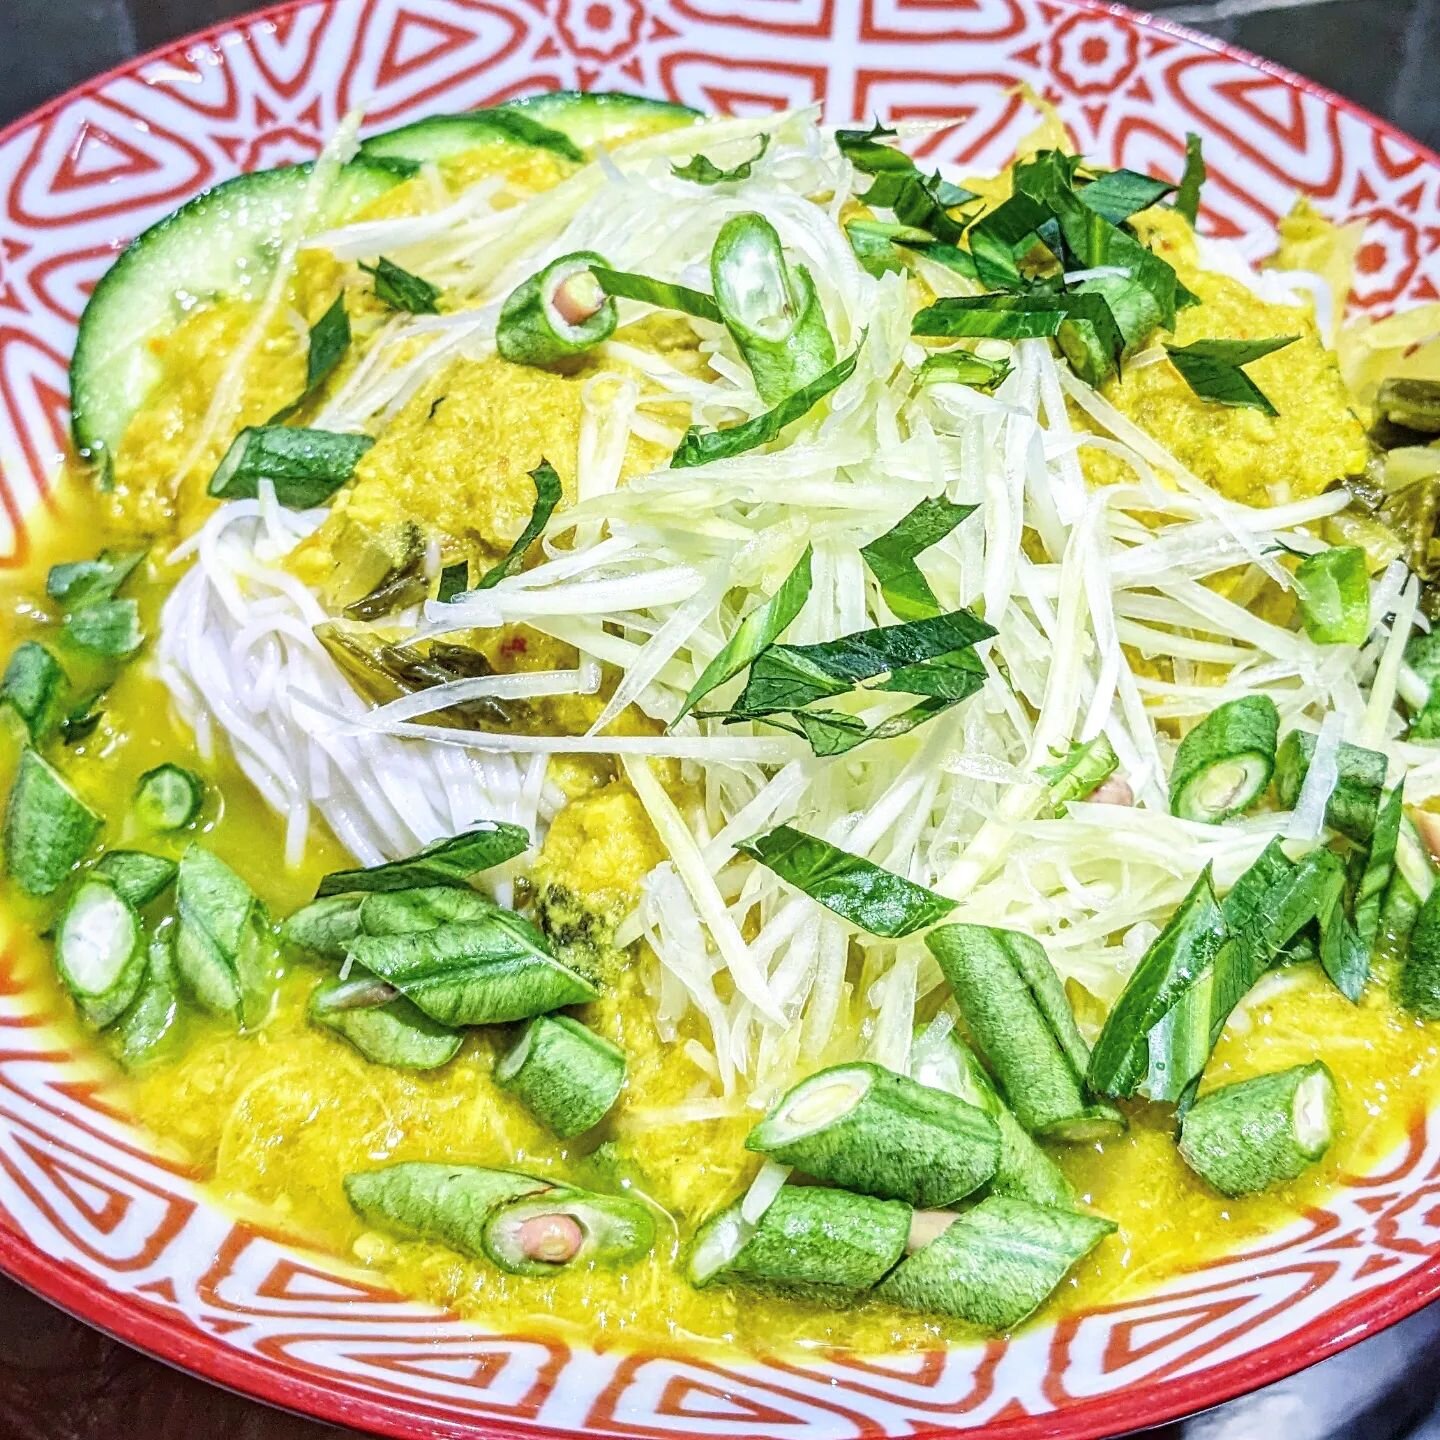 Murray Cod and Crab coconut curry noodles aka Kanom Jean Namya
With green mango, papaya, long beans, cucumber and pickled mustard greens
🤤🤤🤤🤤🤤

I've been working a while on my grandma's fish curry noodles and she once dropped the little golden n